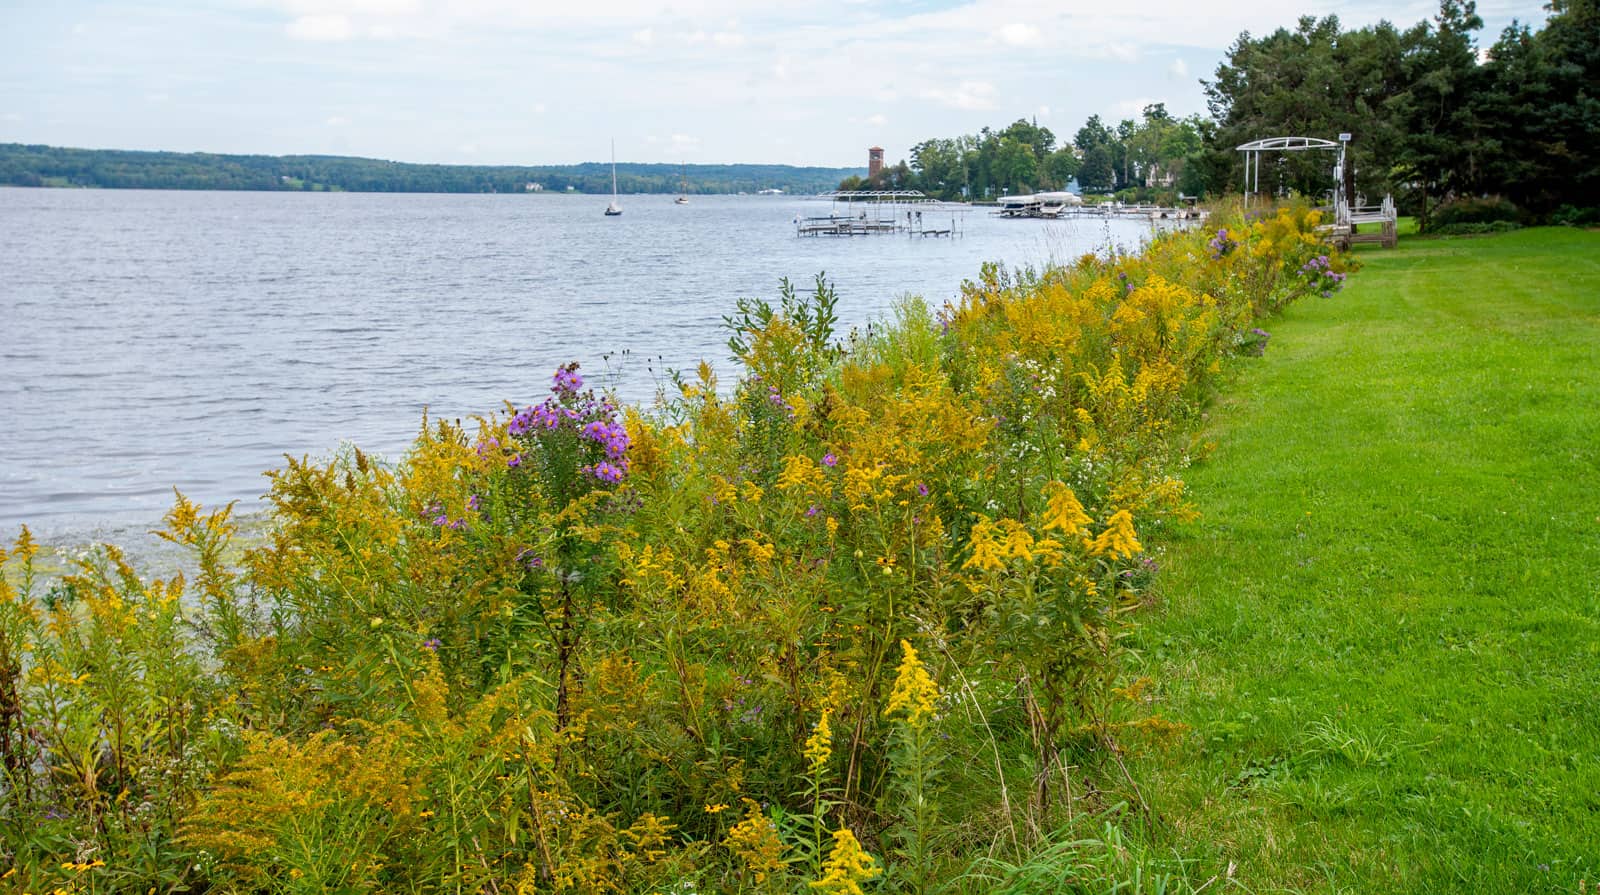 A view of the shoreline along Chauatuqua Lake with Miller Bell Tower in the background